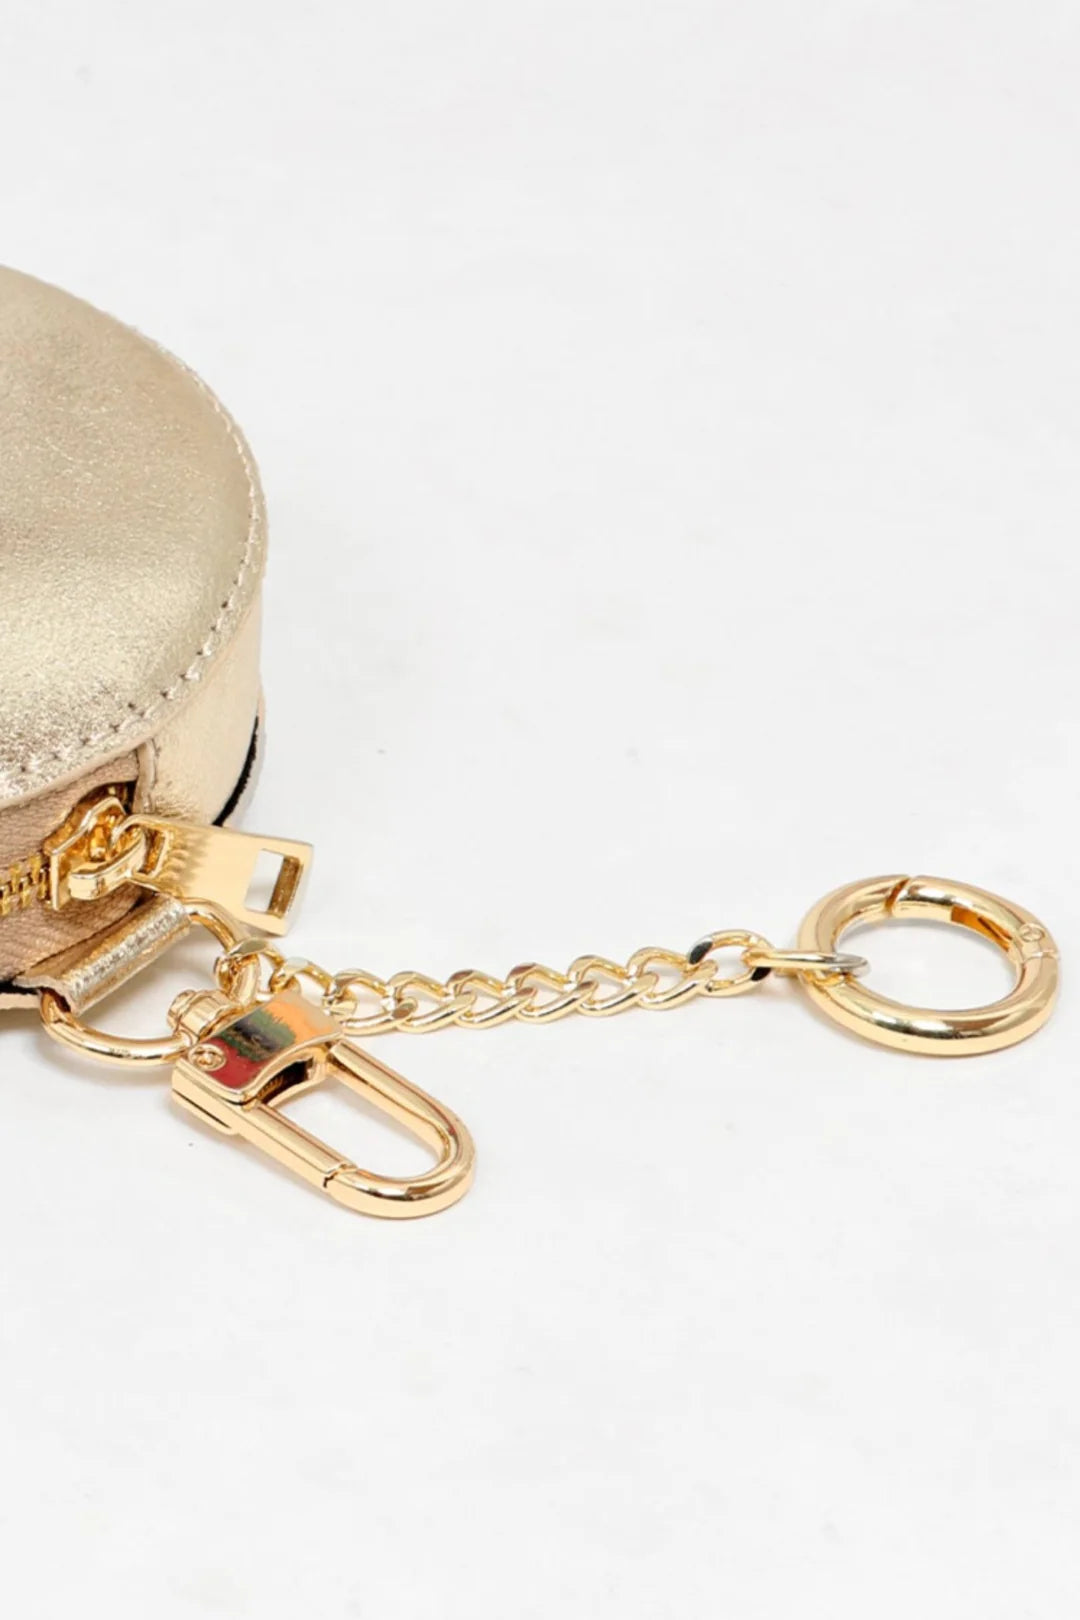 Sands - Leather Coin Purse / Gold